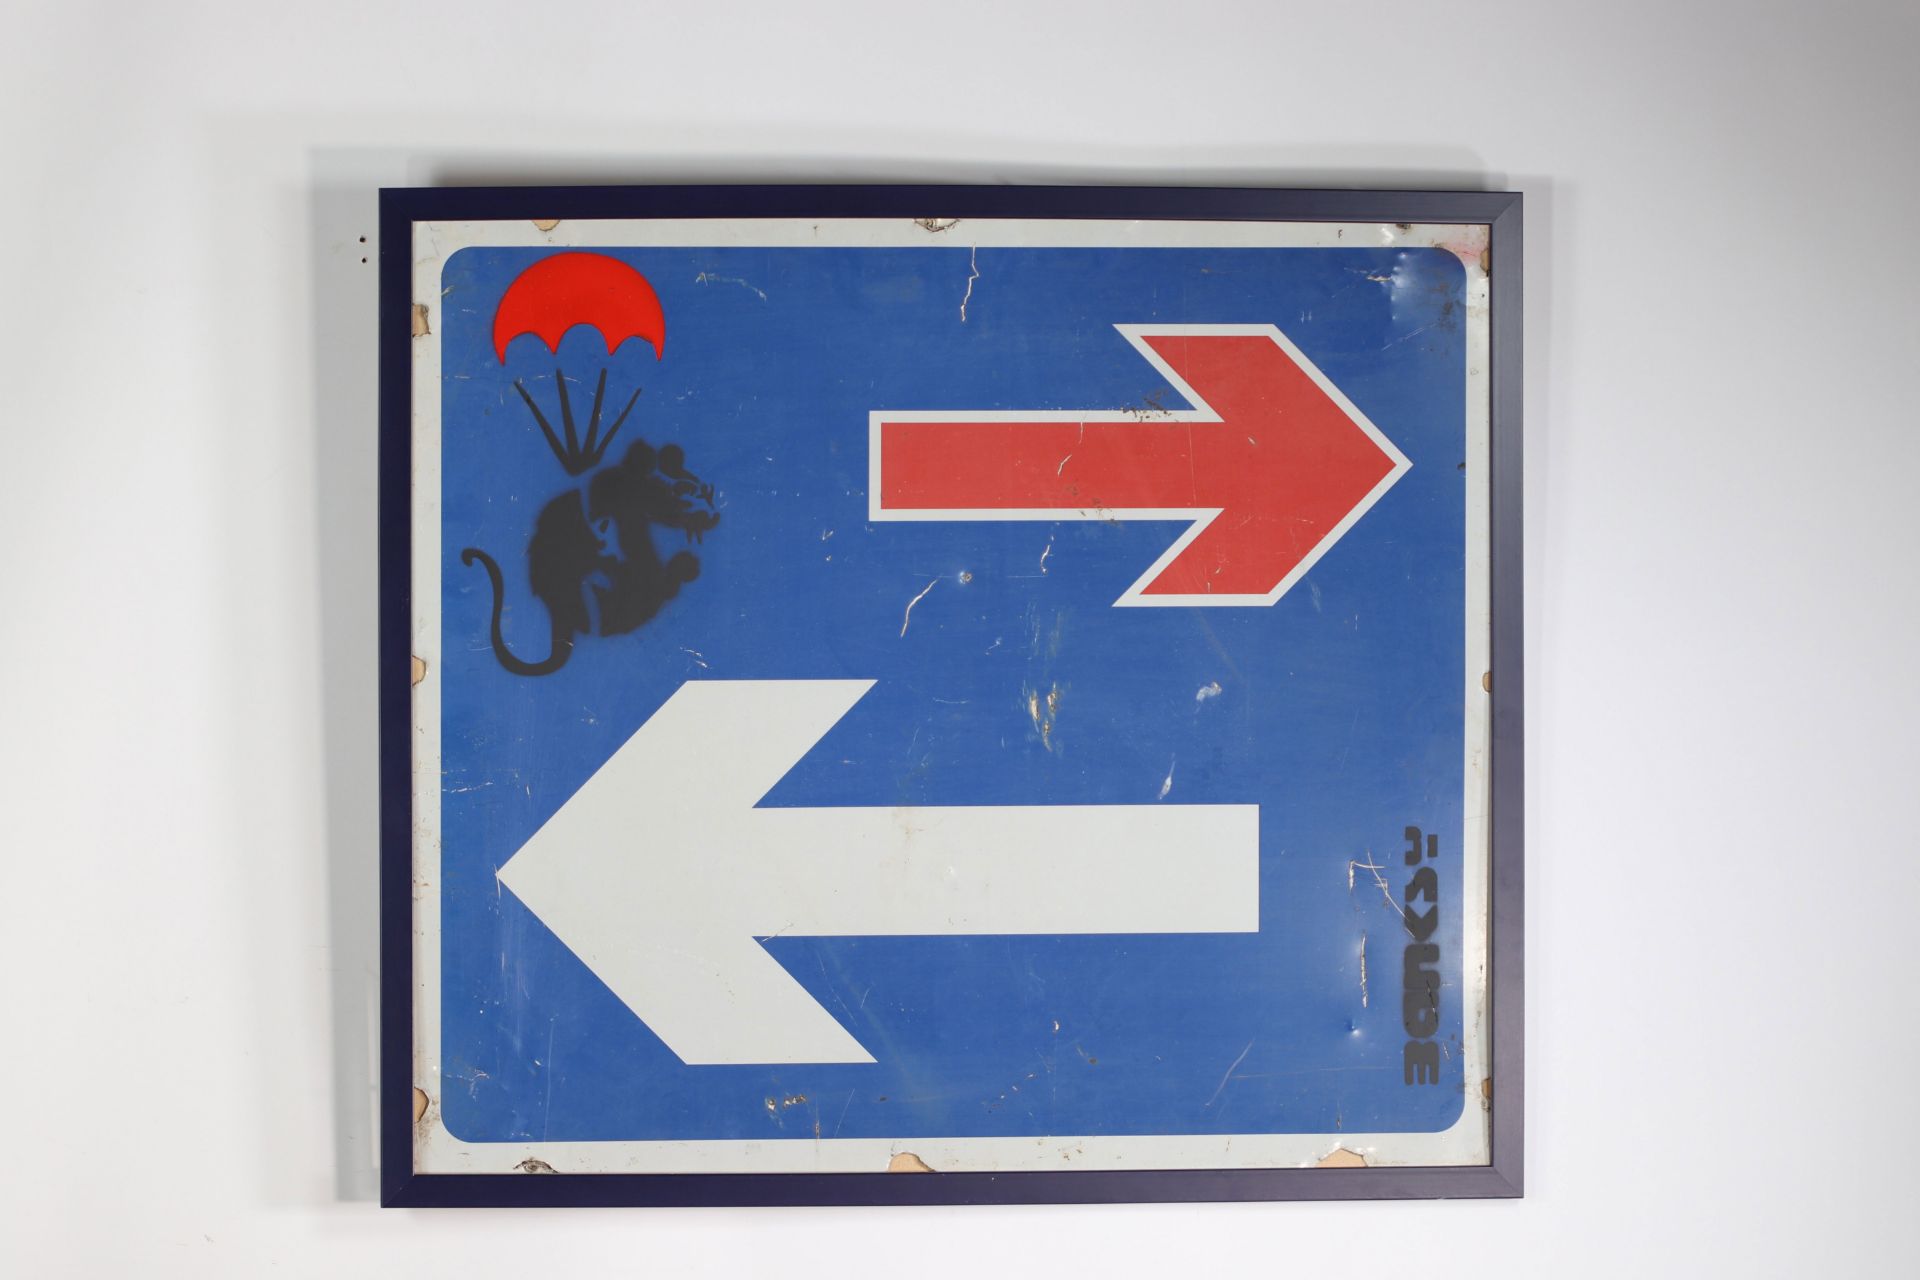 Banksy Parachuting Rat Road sign Stencil and paintings representing a black rat in a red parachute S - Image 2 of 2